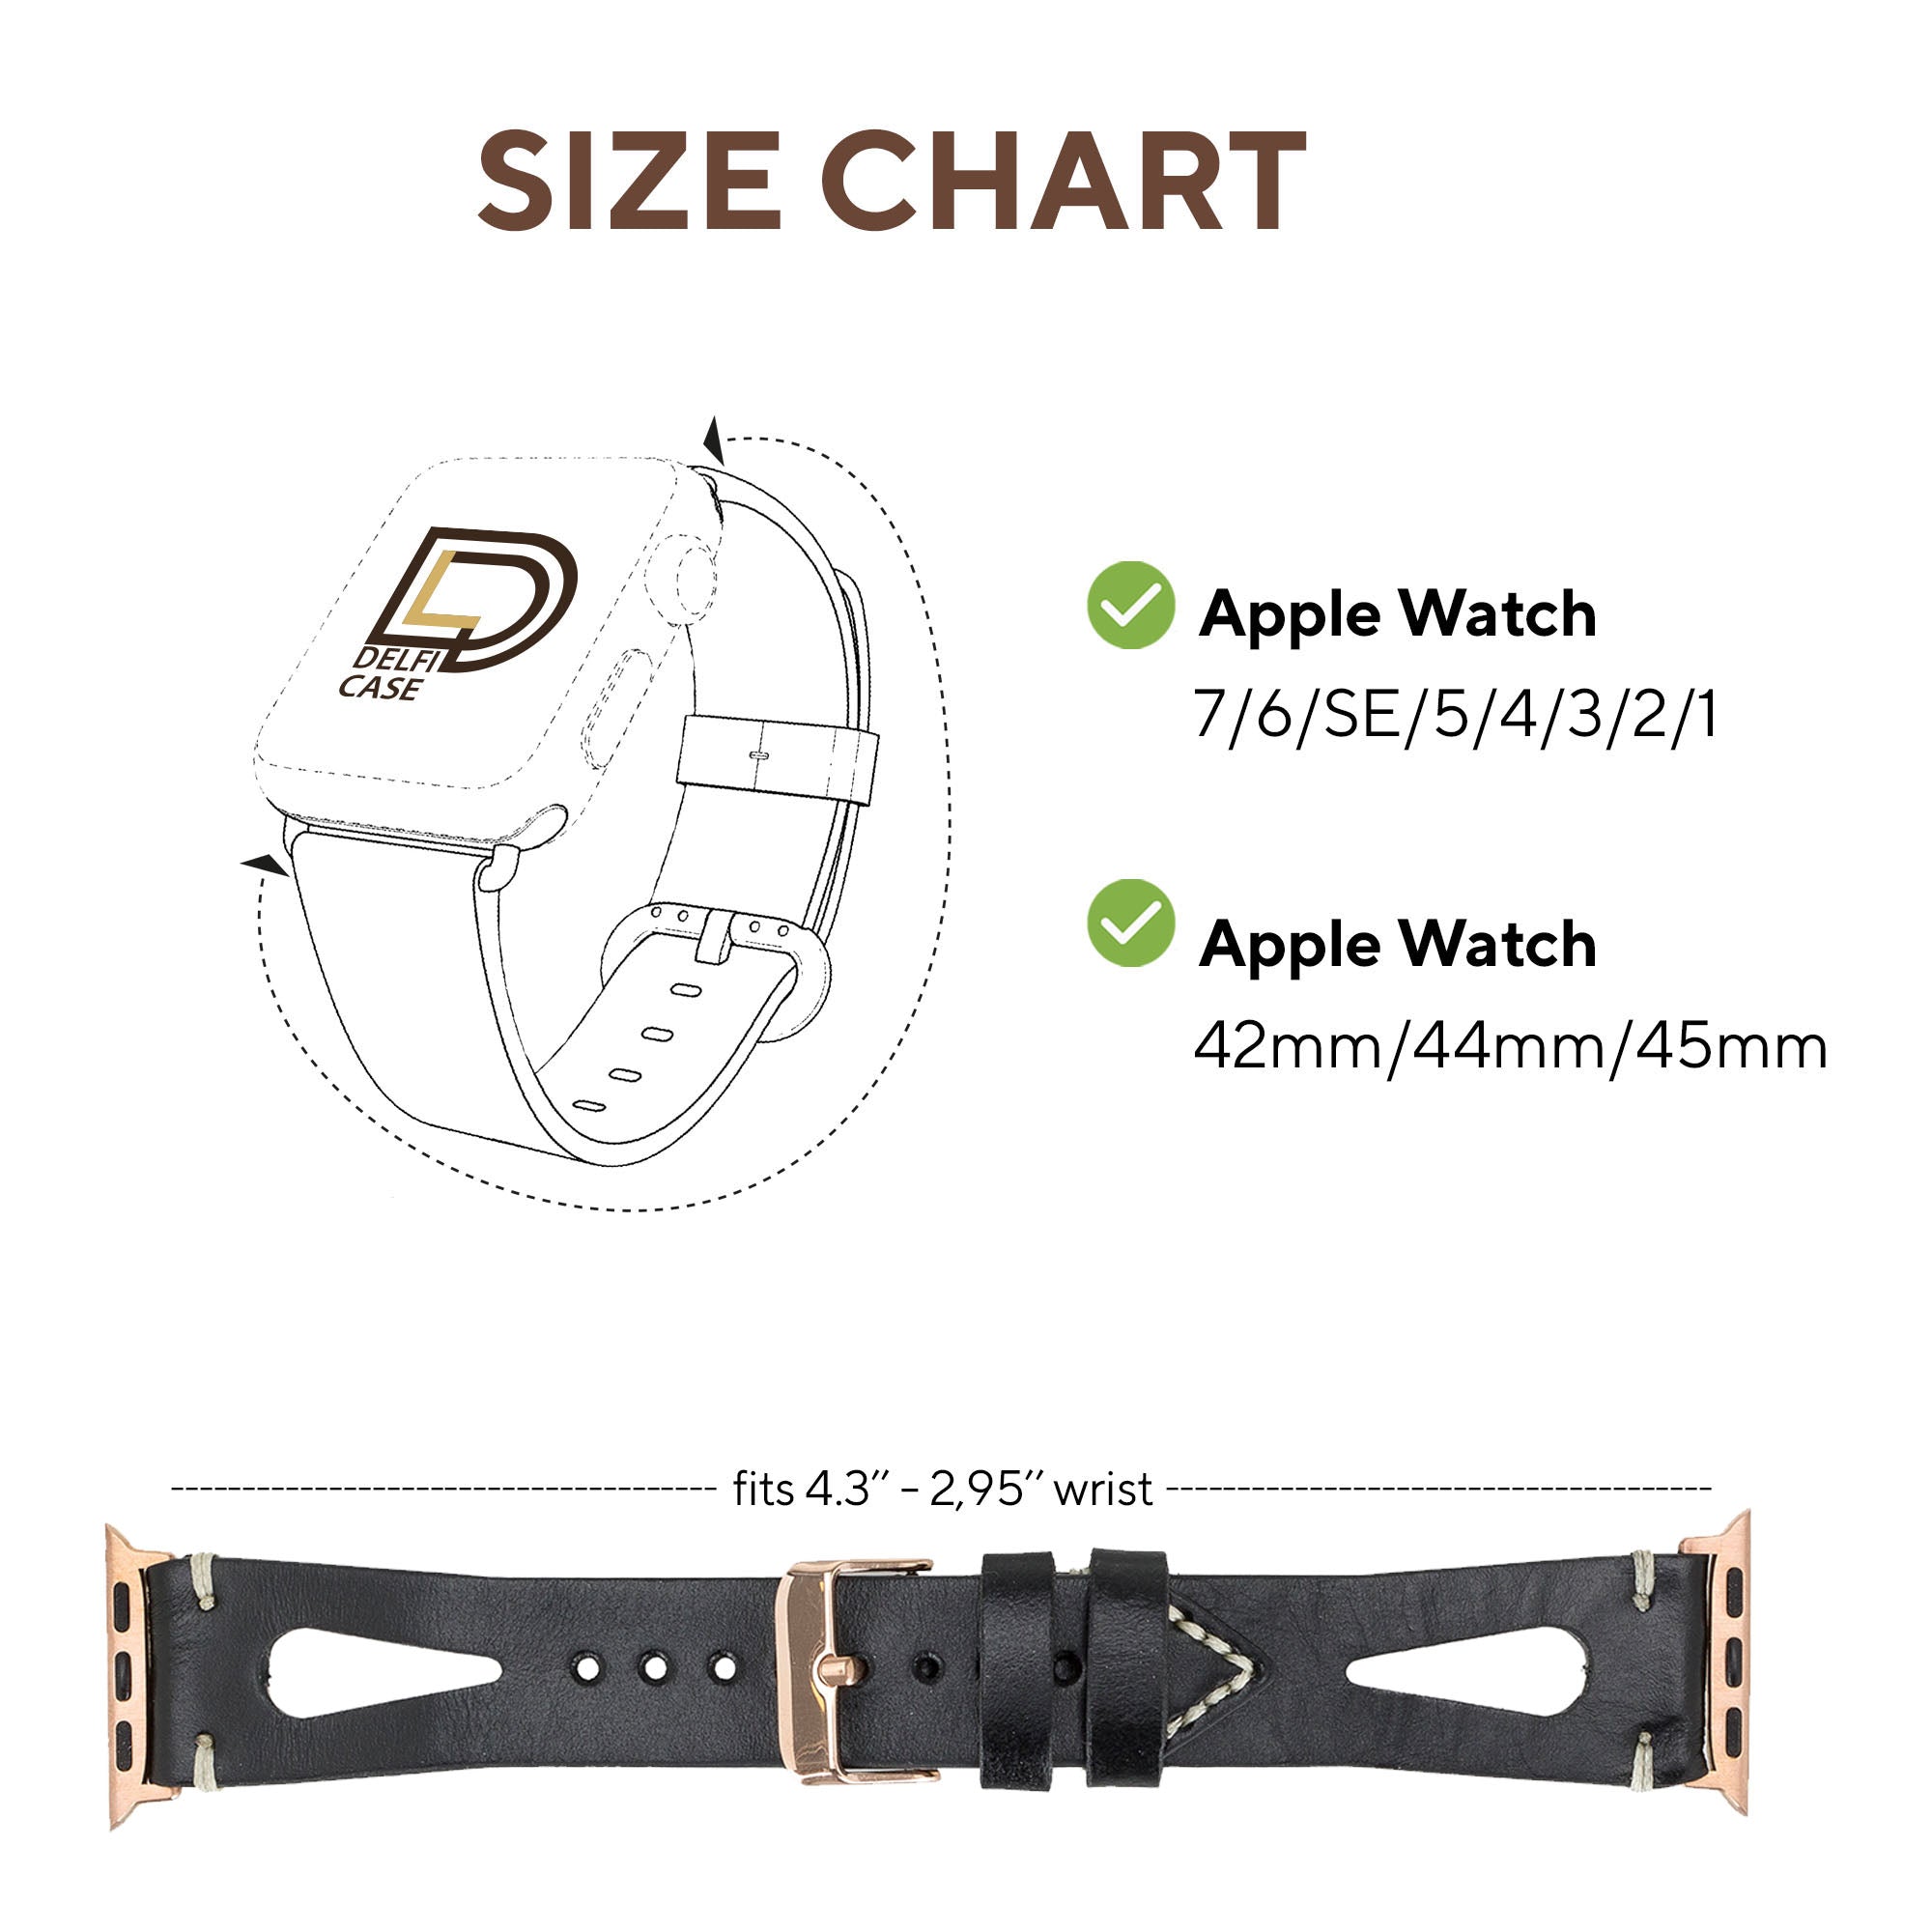 DelfiCase Cardiff Collection Leather Watch Band for Apple Watch 38mm 40mm 41mm 42mm 44mm 45mm 42